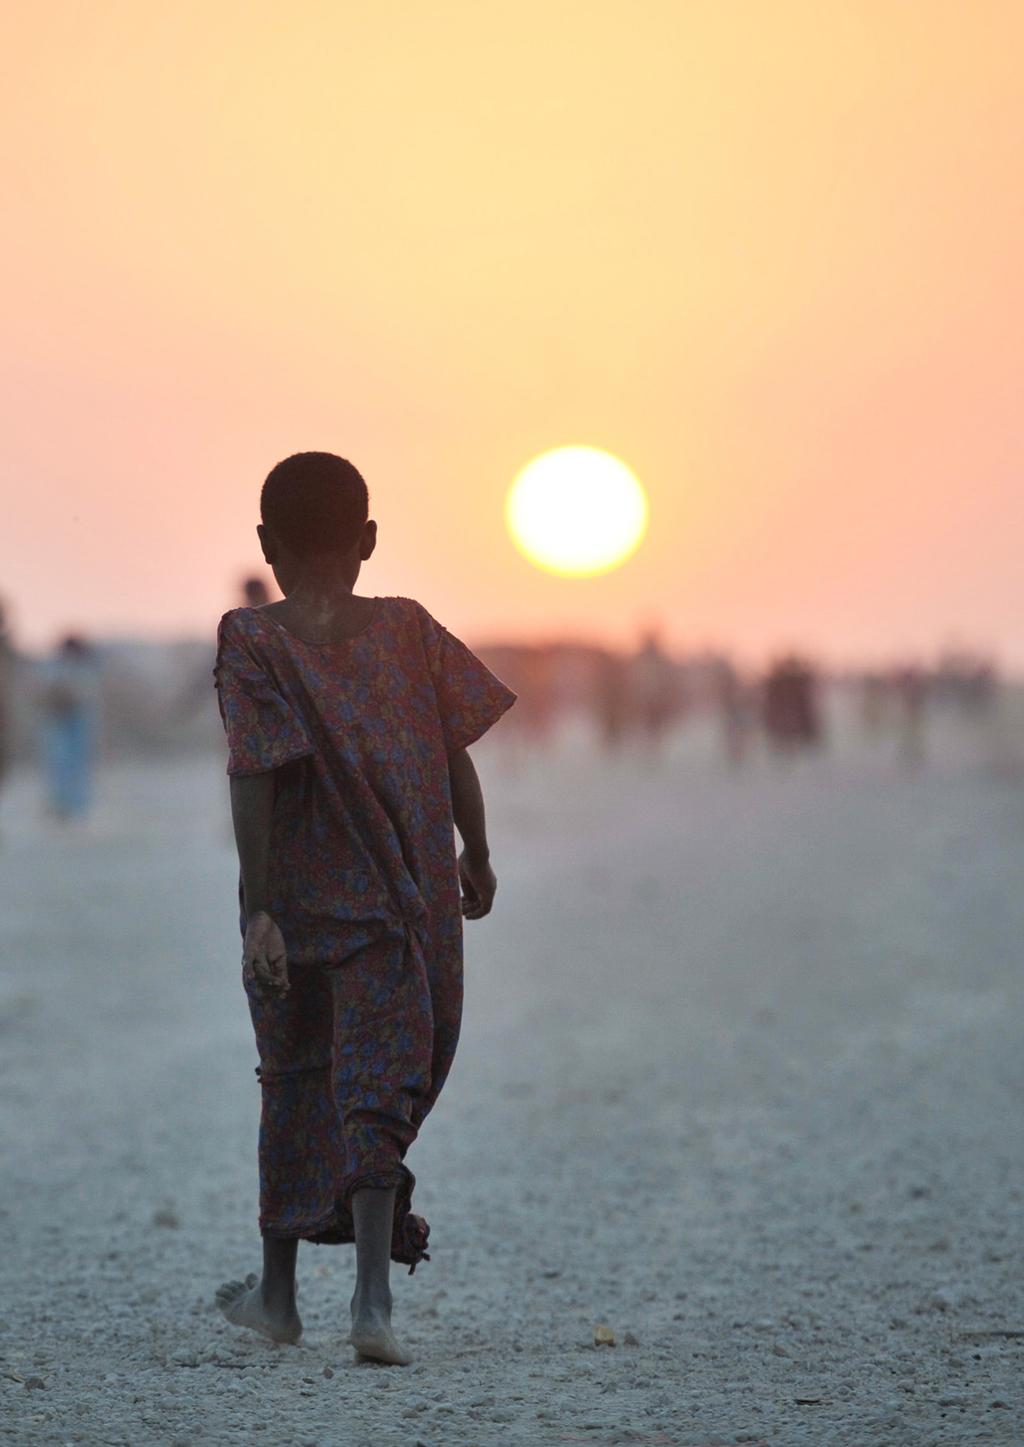 INTRODUCTION OCHA A Somali girl walks down a road at sunset in an IDP